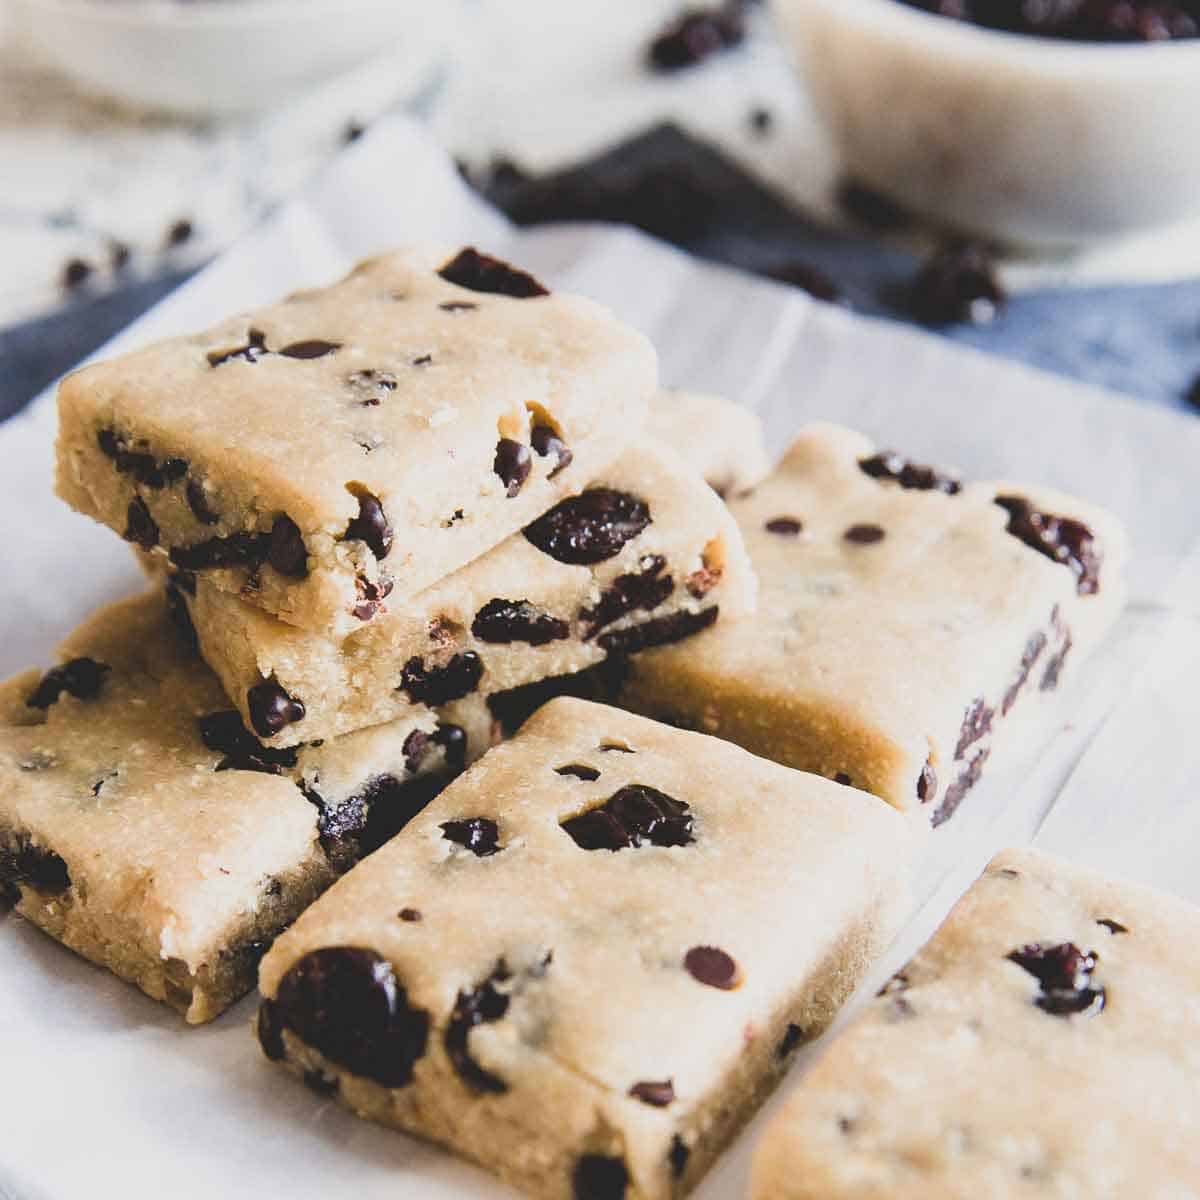 This healthier cookie dough bar recipe is made with a cashew, oat and coconut flour base then studded with chocolate chips and dried tart cherries.